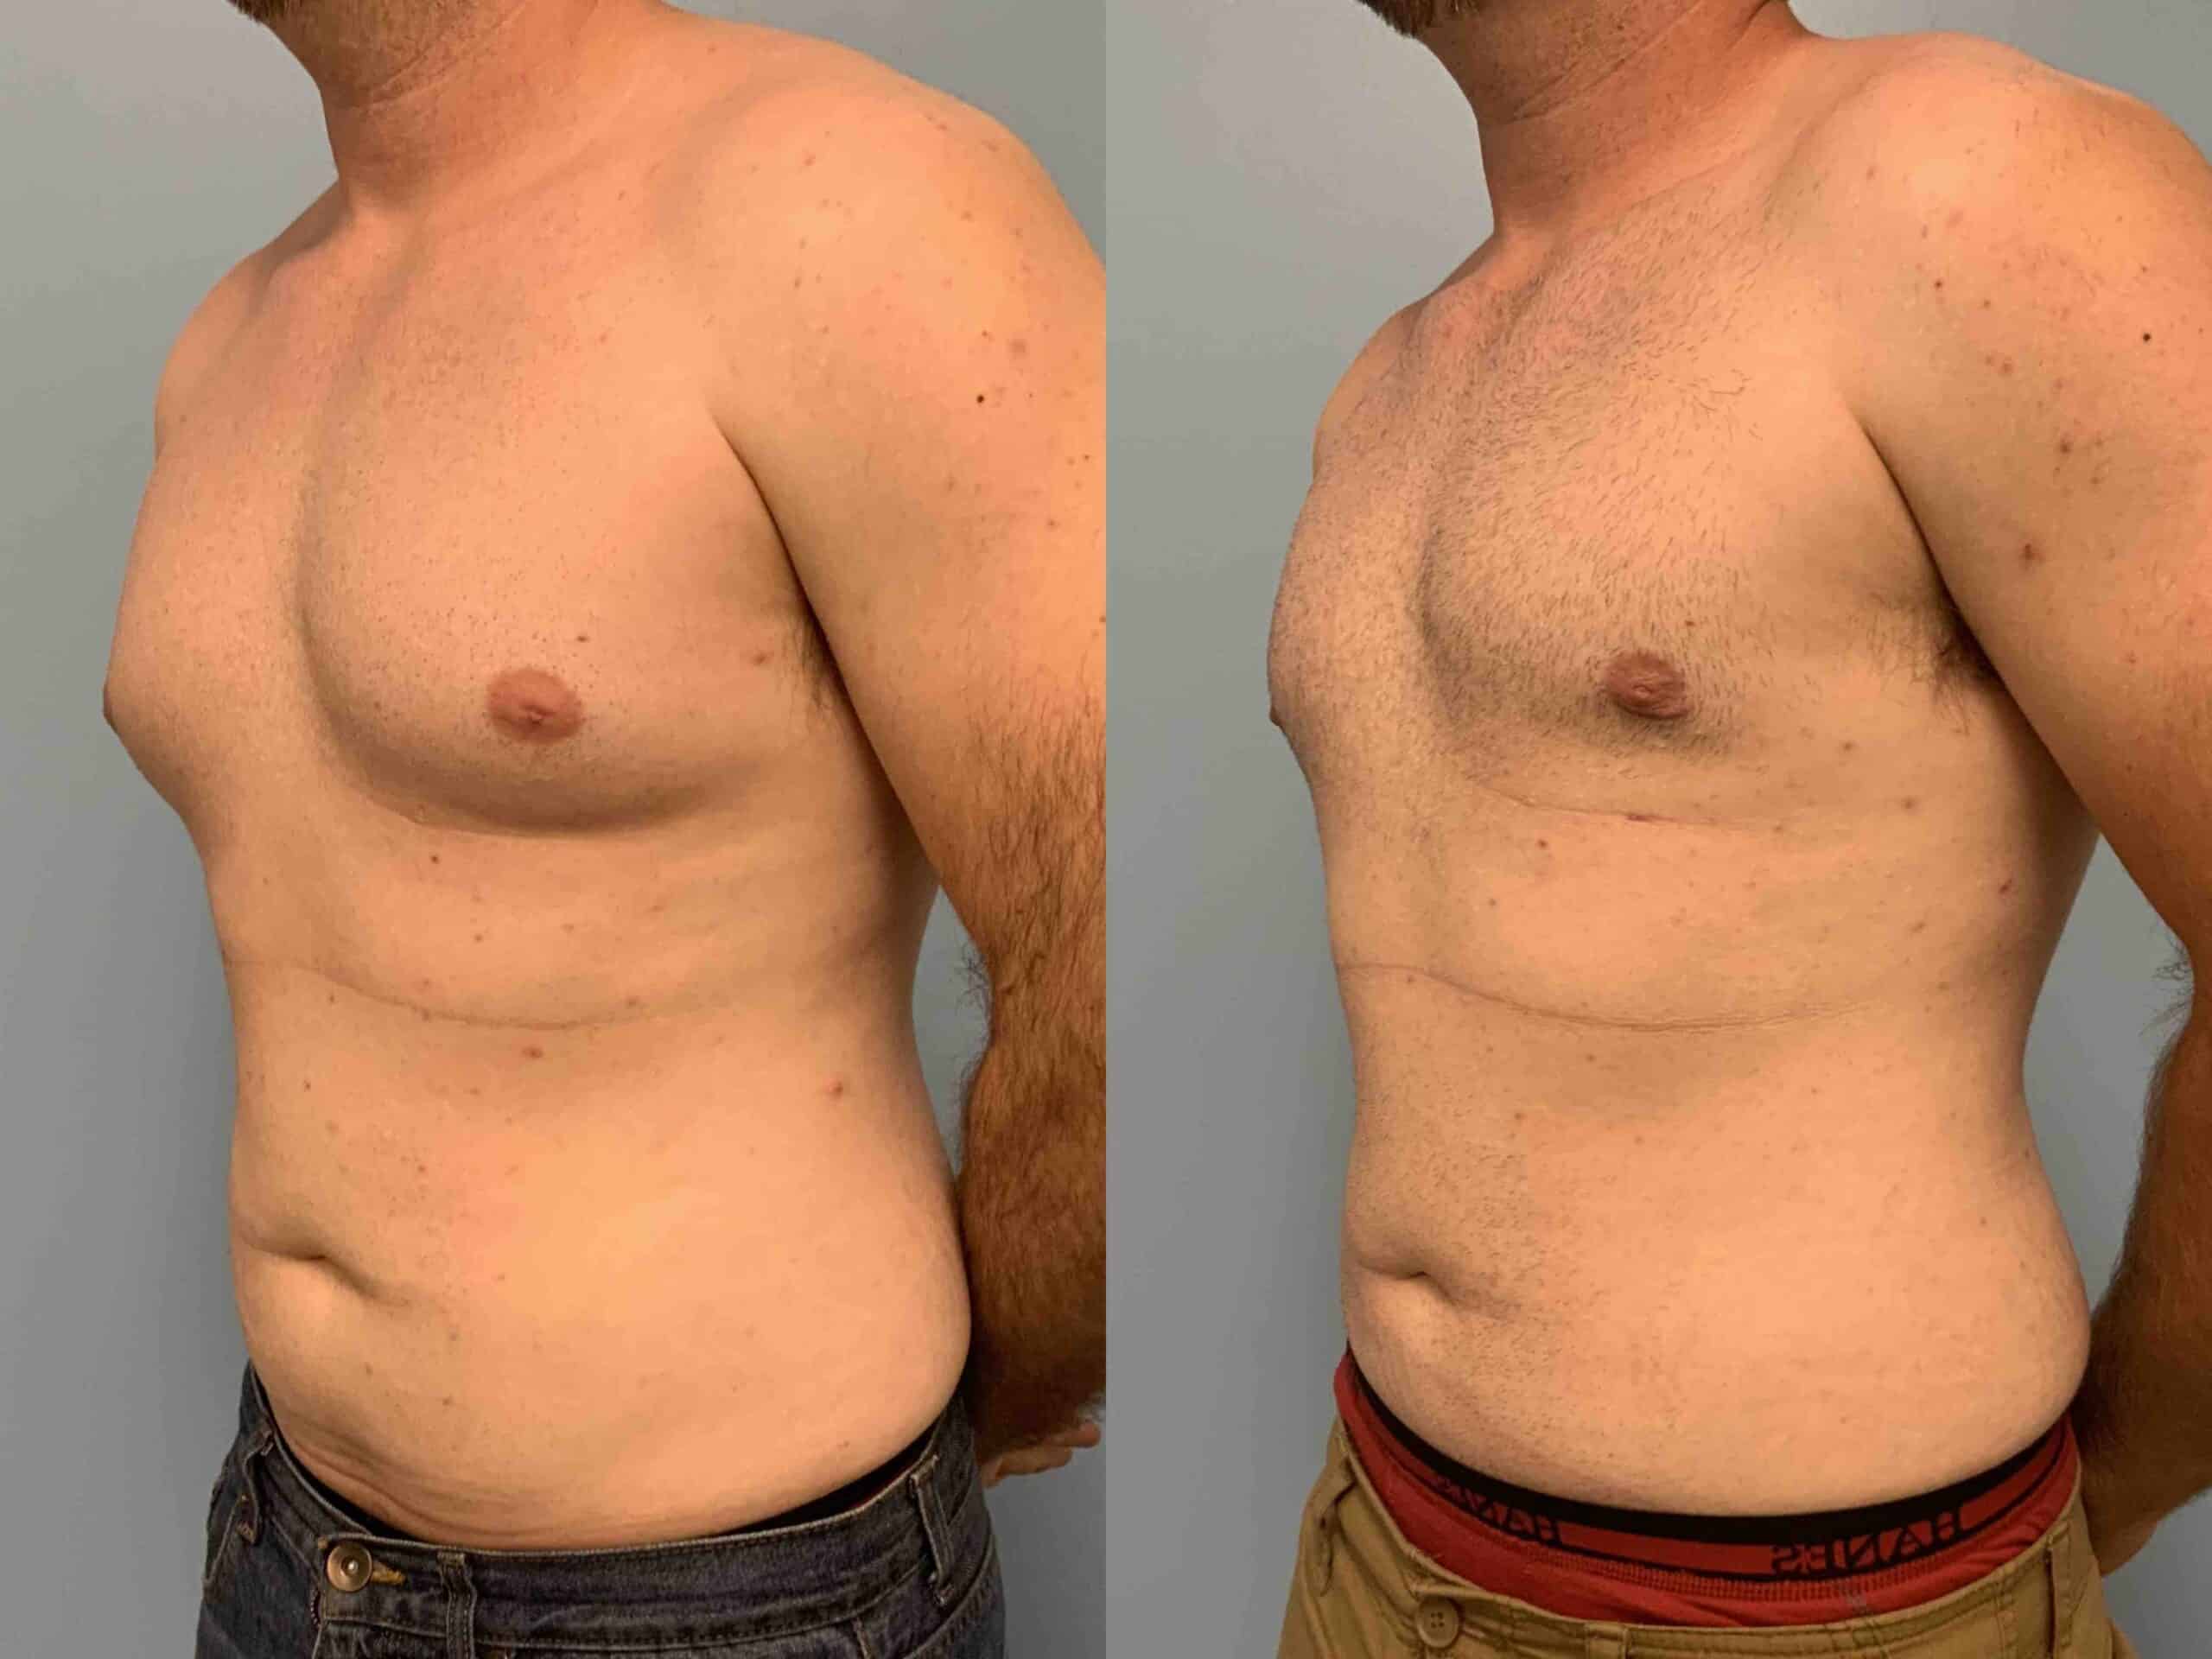 Before and after, patient 6 mo post op from VASER Abdomen, Flank, Chest, Gynecomastia, procedures performed by Dr. Paul Vanek